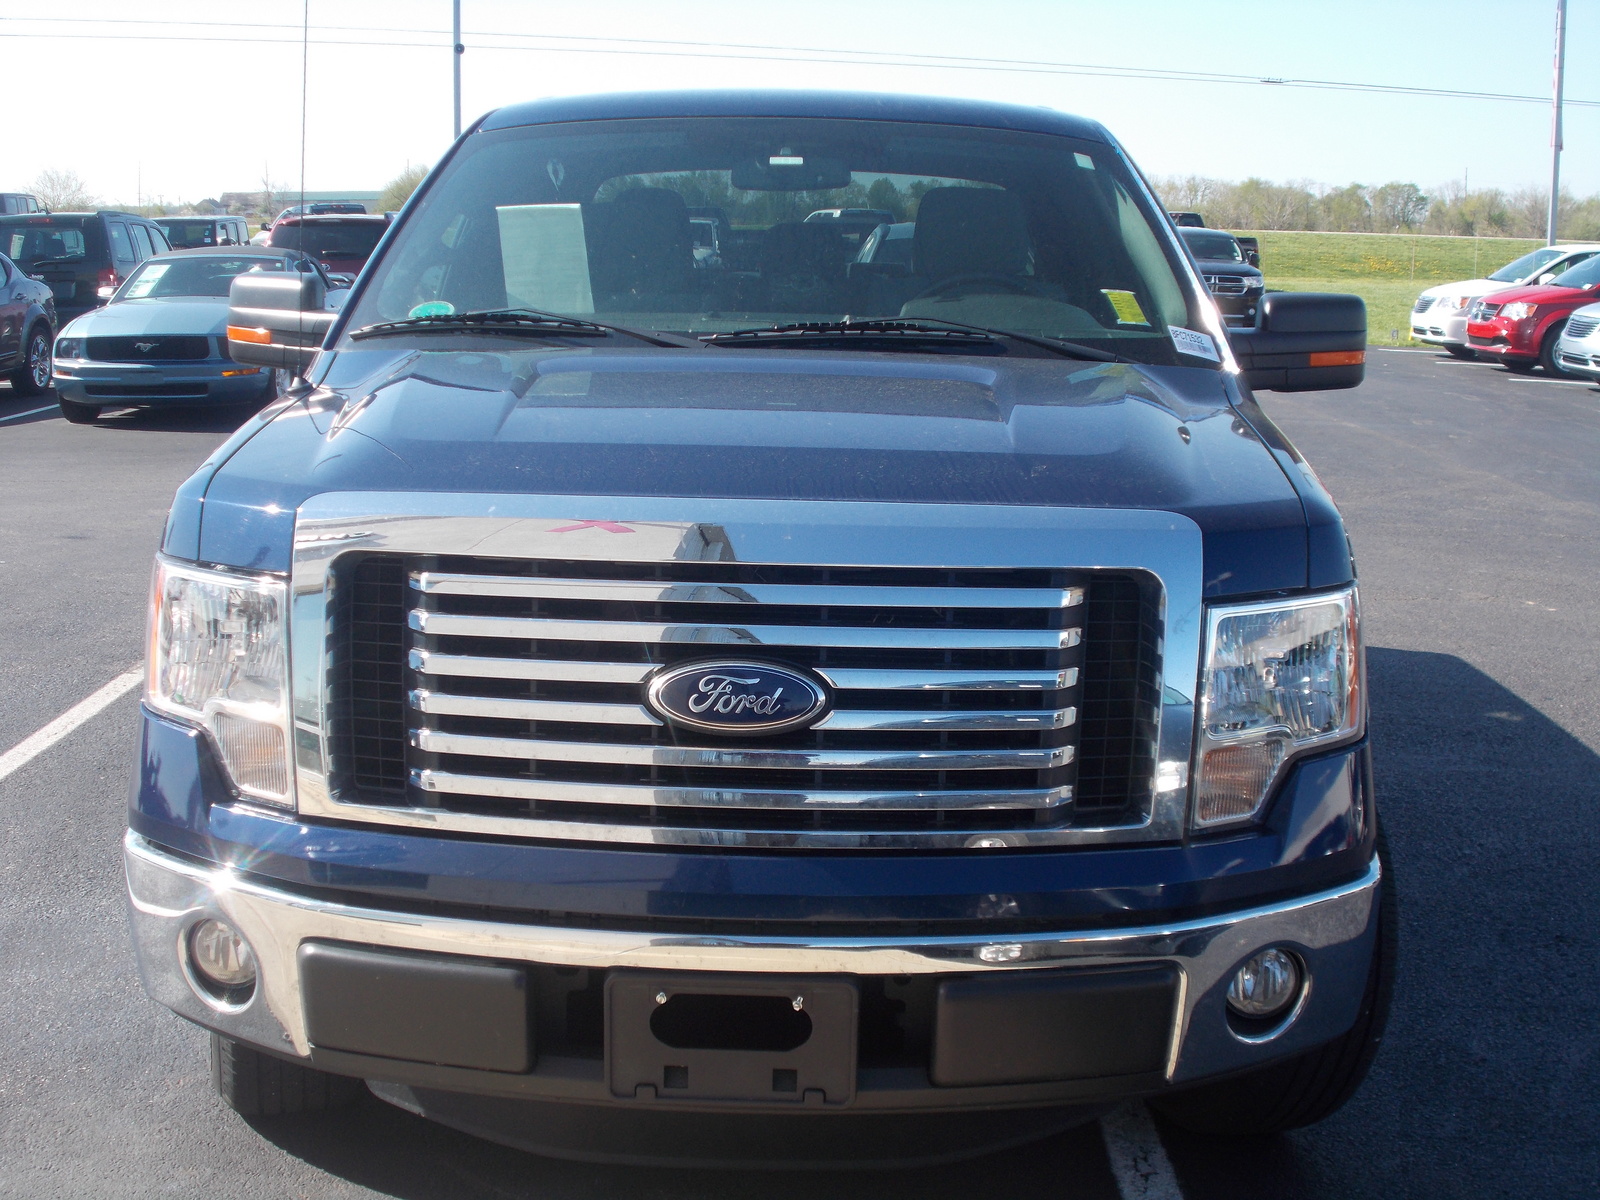 Ford f150 king ranch for sale georgia #4